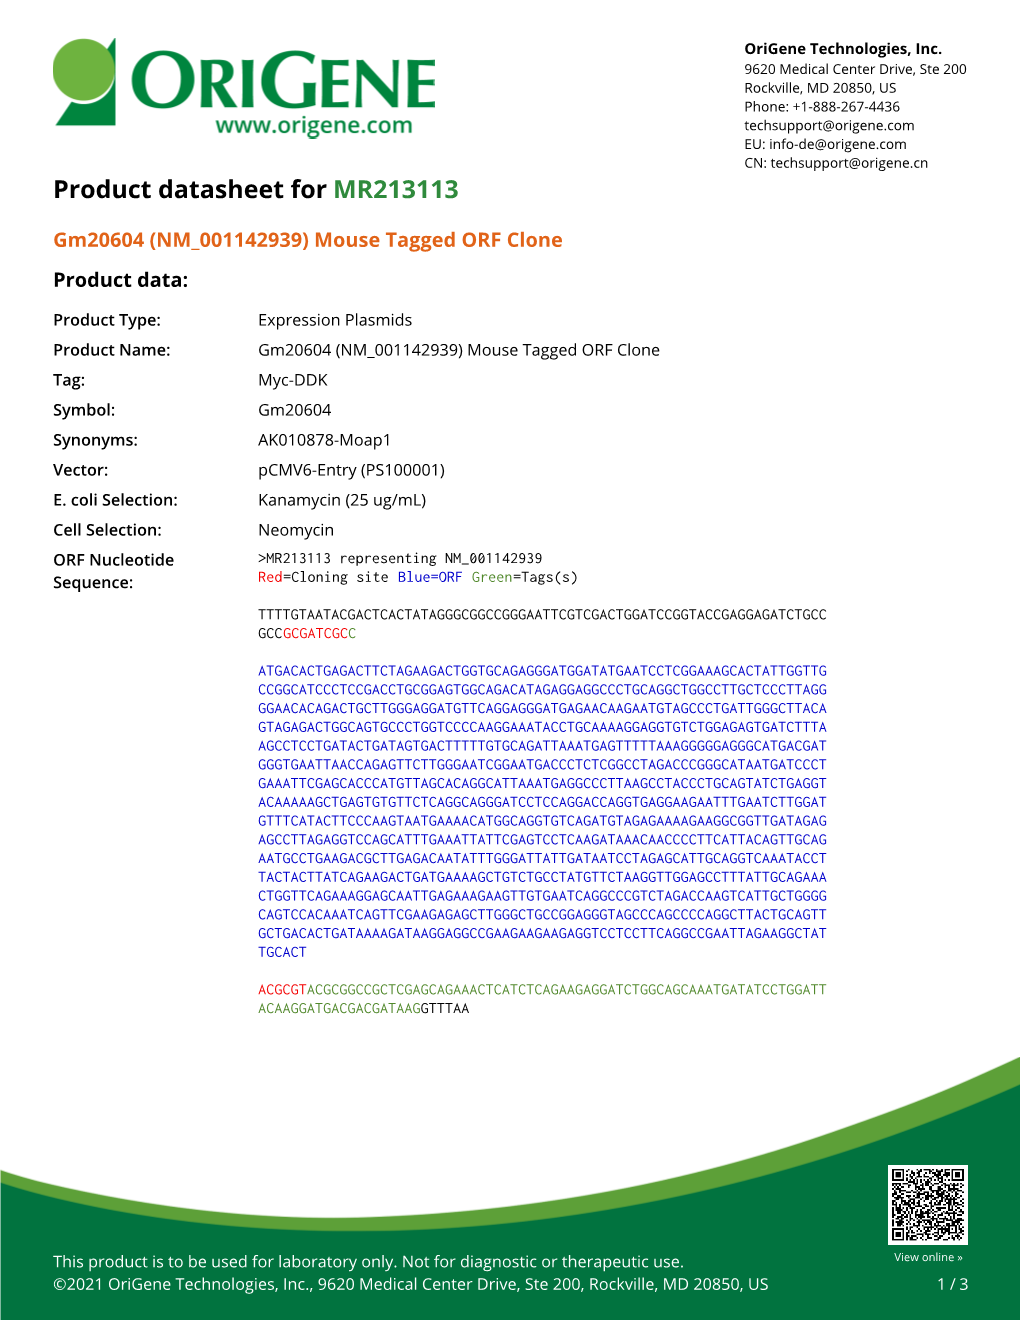 Mouse Tagged ORF Clone – MR213113